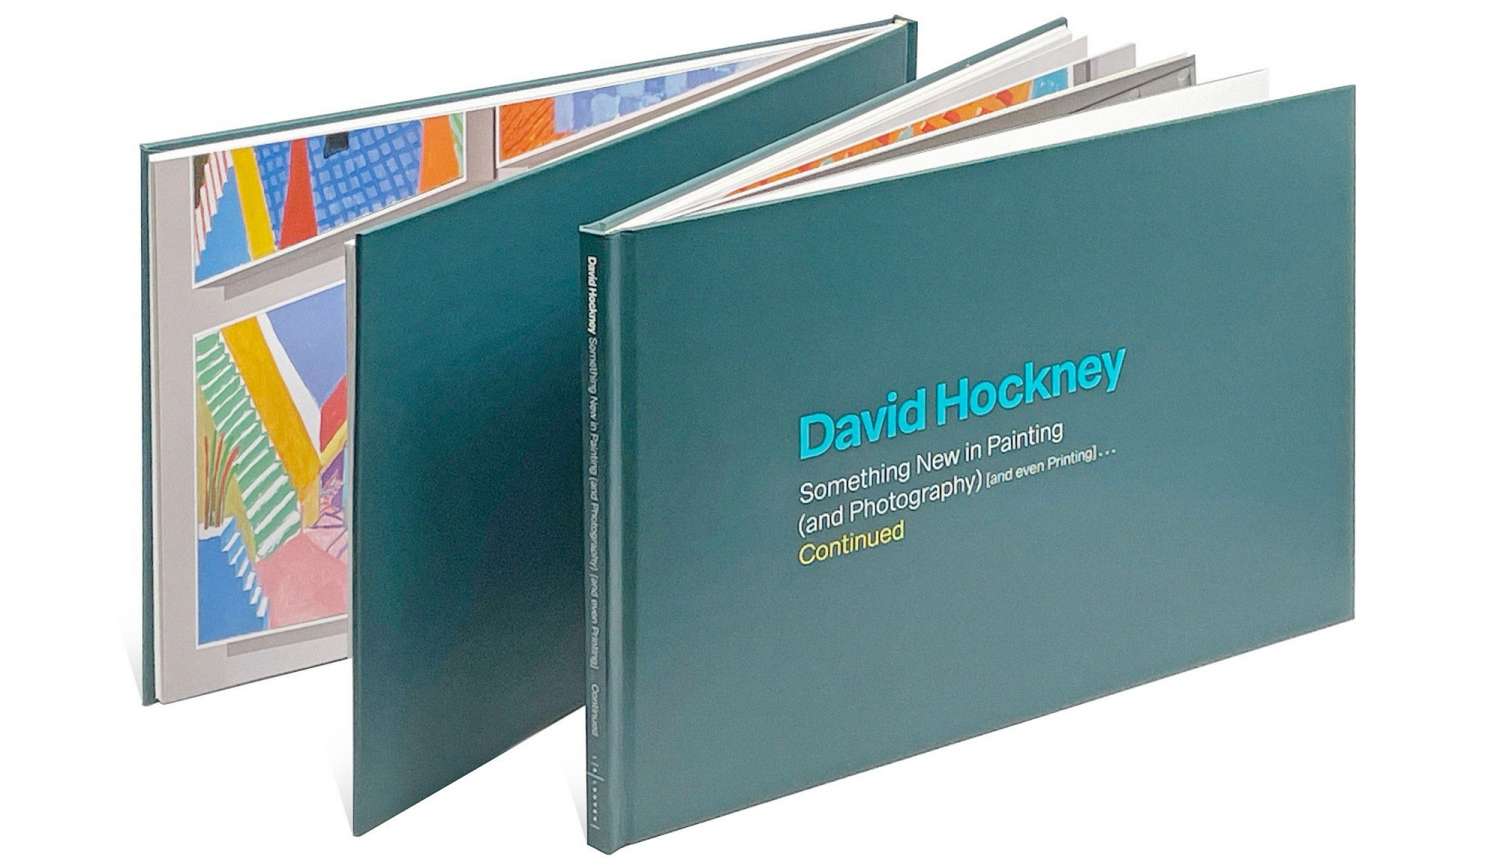 David Hockney: Something New In Painting (and Photography) [and even Printing] …